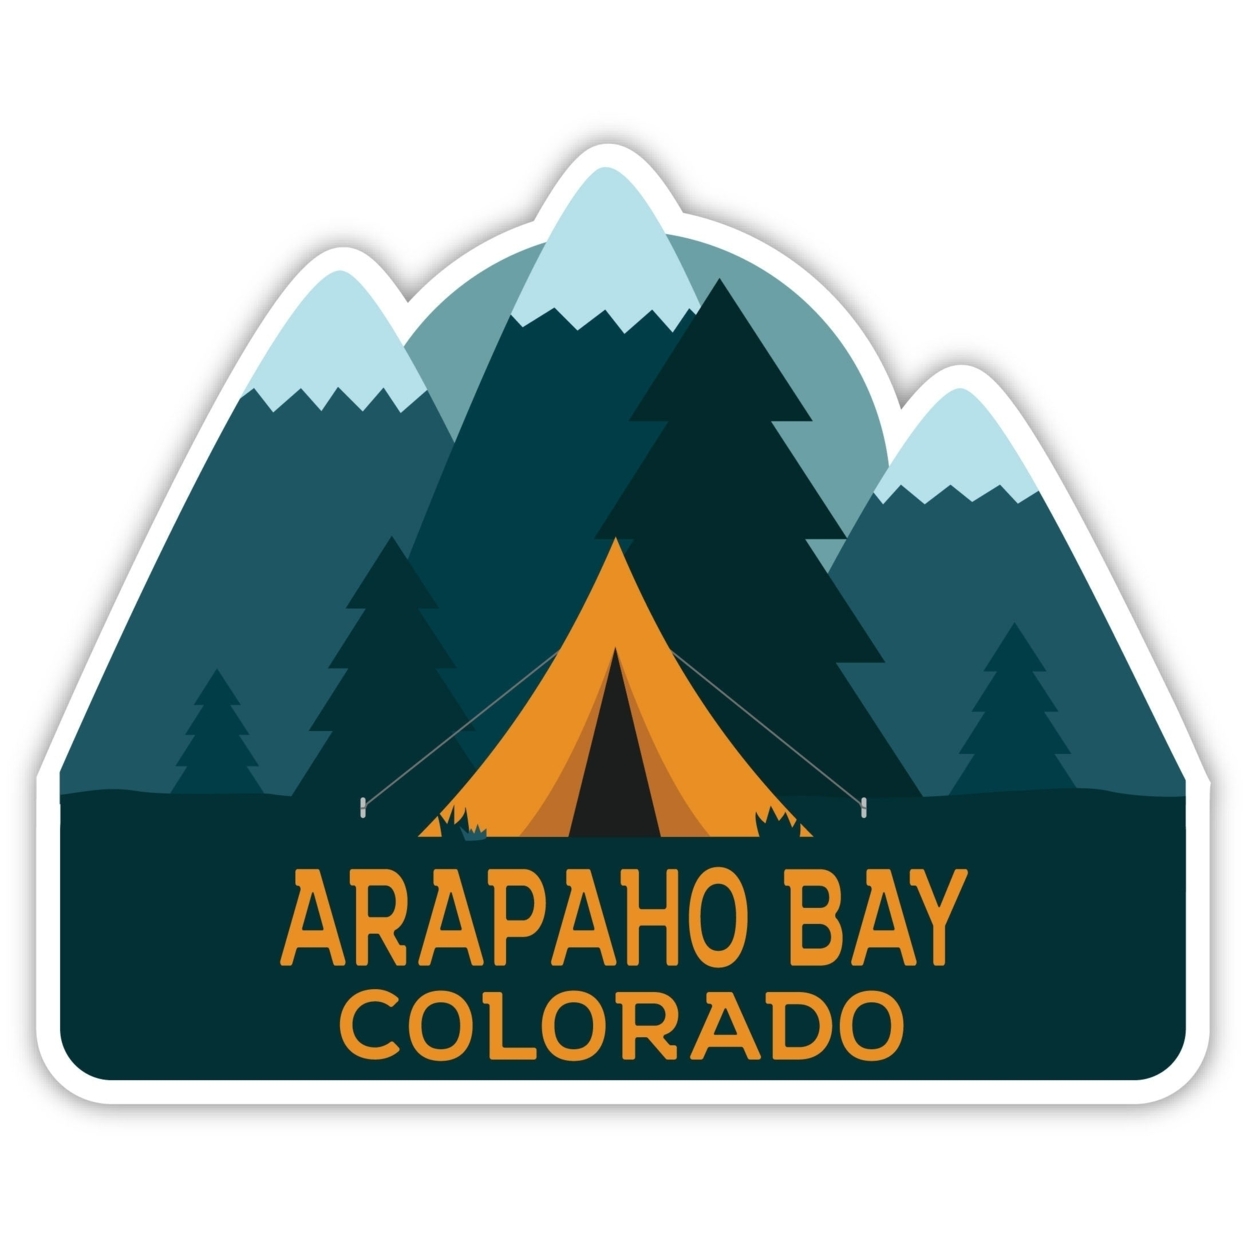 Arapaho Bay Colorado Souvenir Decorative Stickers (Choose Theme And Size) - 4-Pack, 4-Inch, Tent